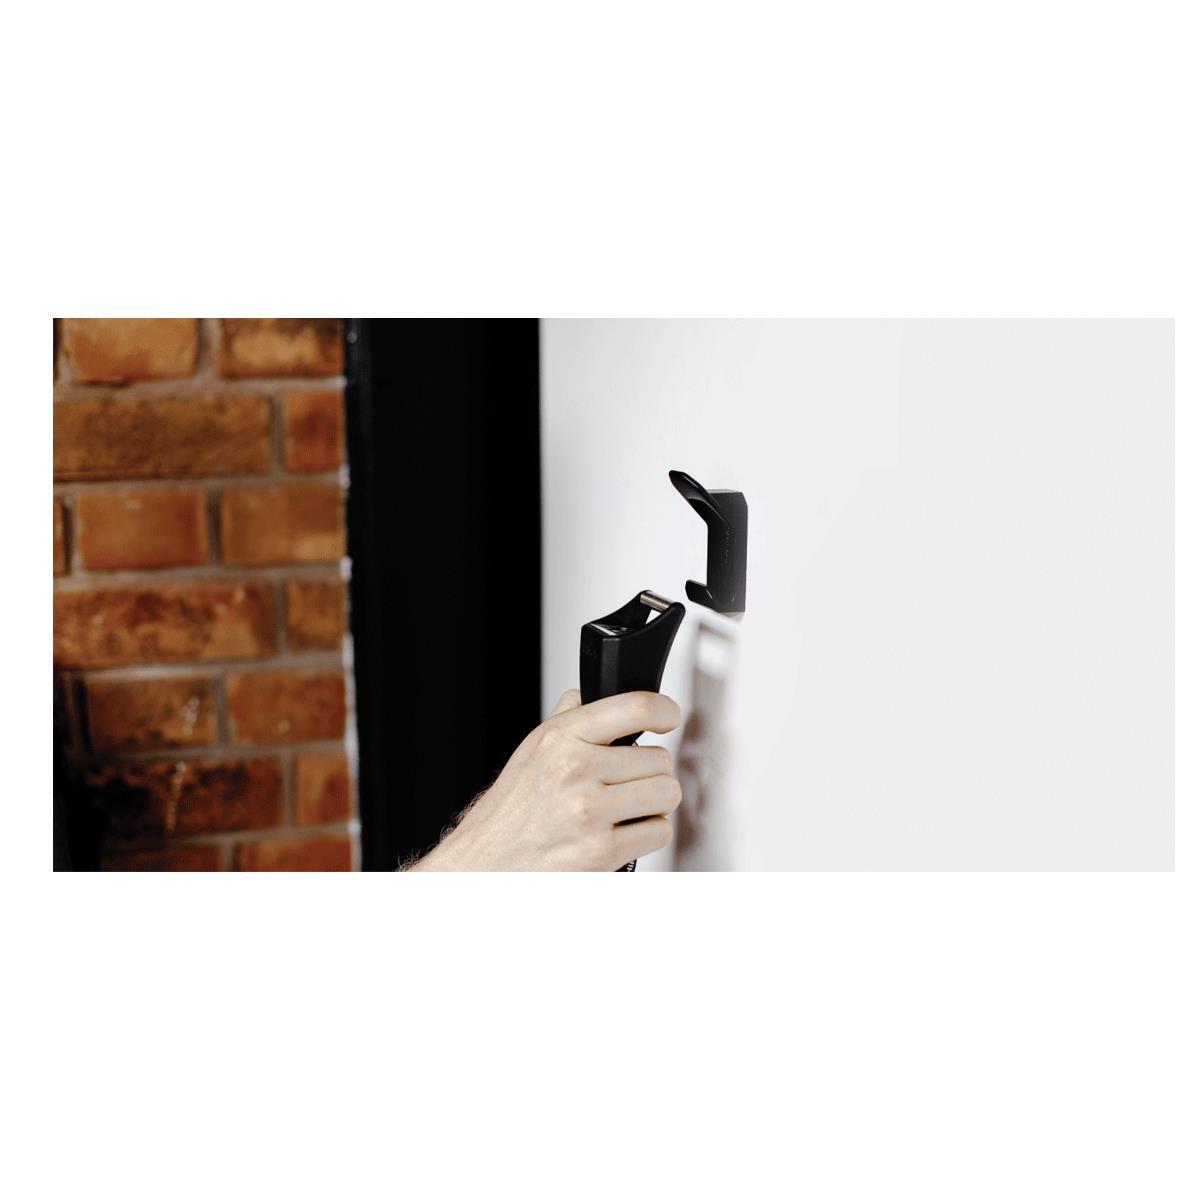 HIPLOK HOME STAY AT HOME CHAIN LOCK 10MM X 150CM INCLUDES WALL HOOK BLACK 3/5